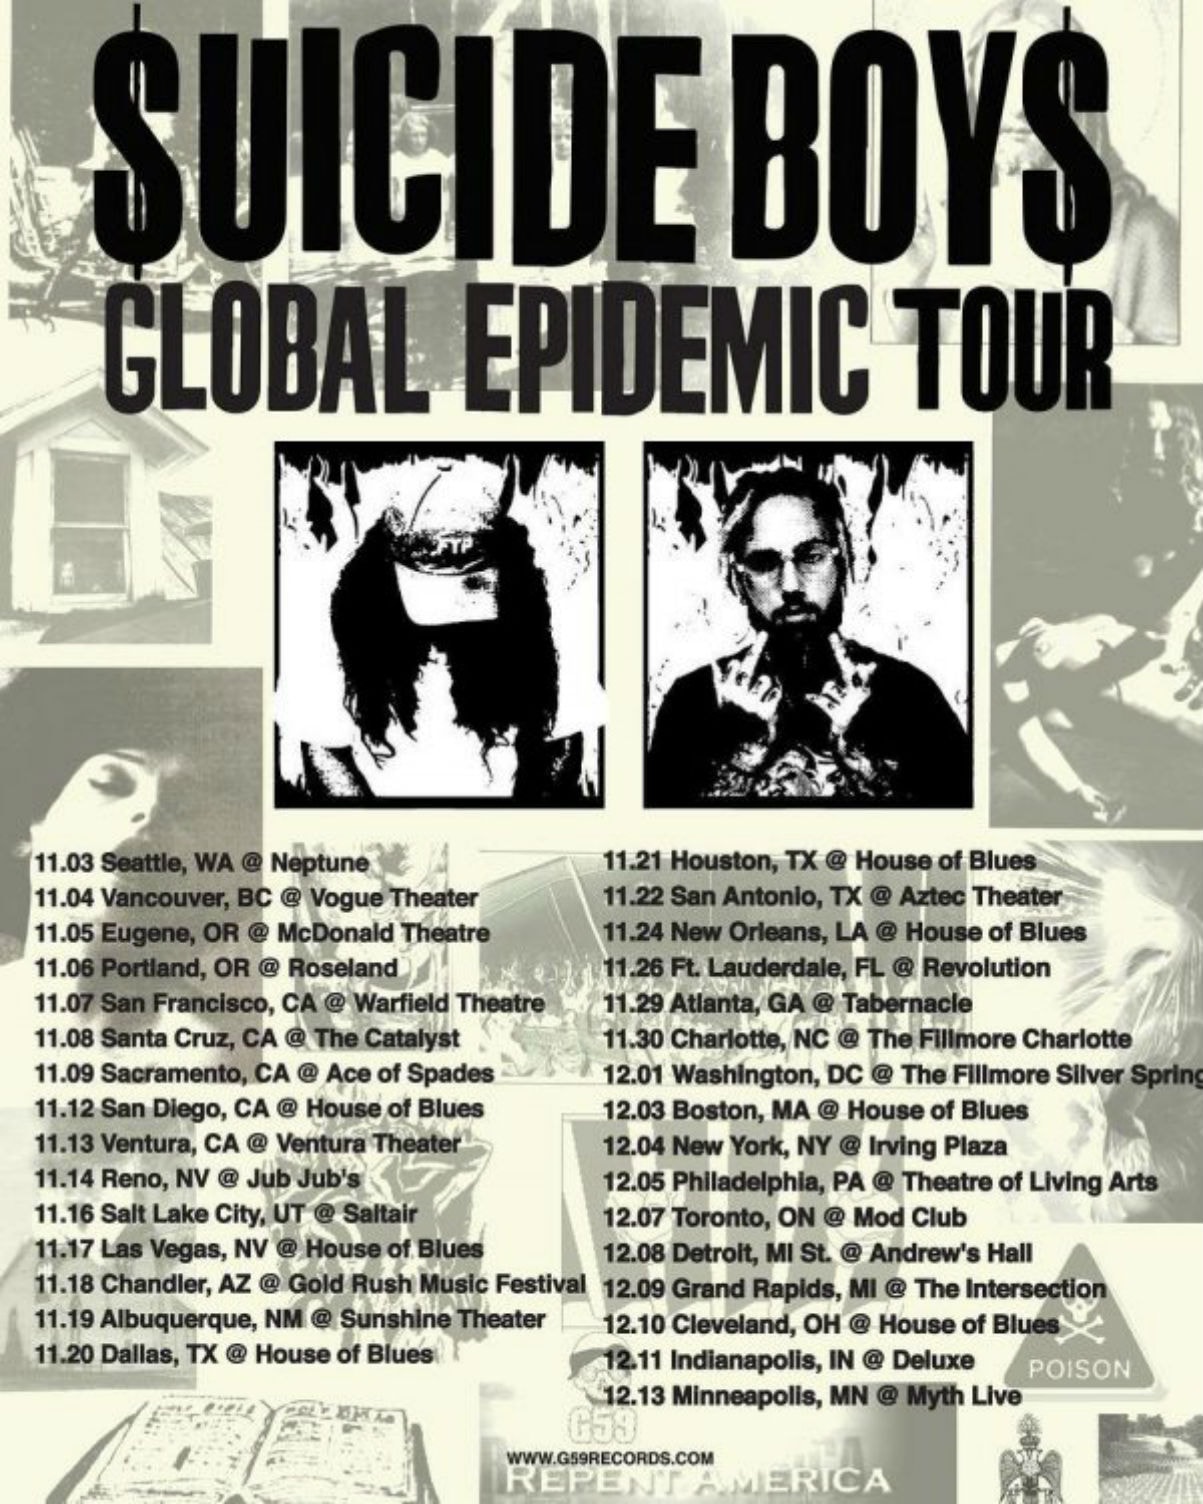 $UICIDEBOY$ Tour 2017 Music Video 2nd Hand Video